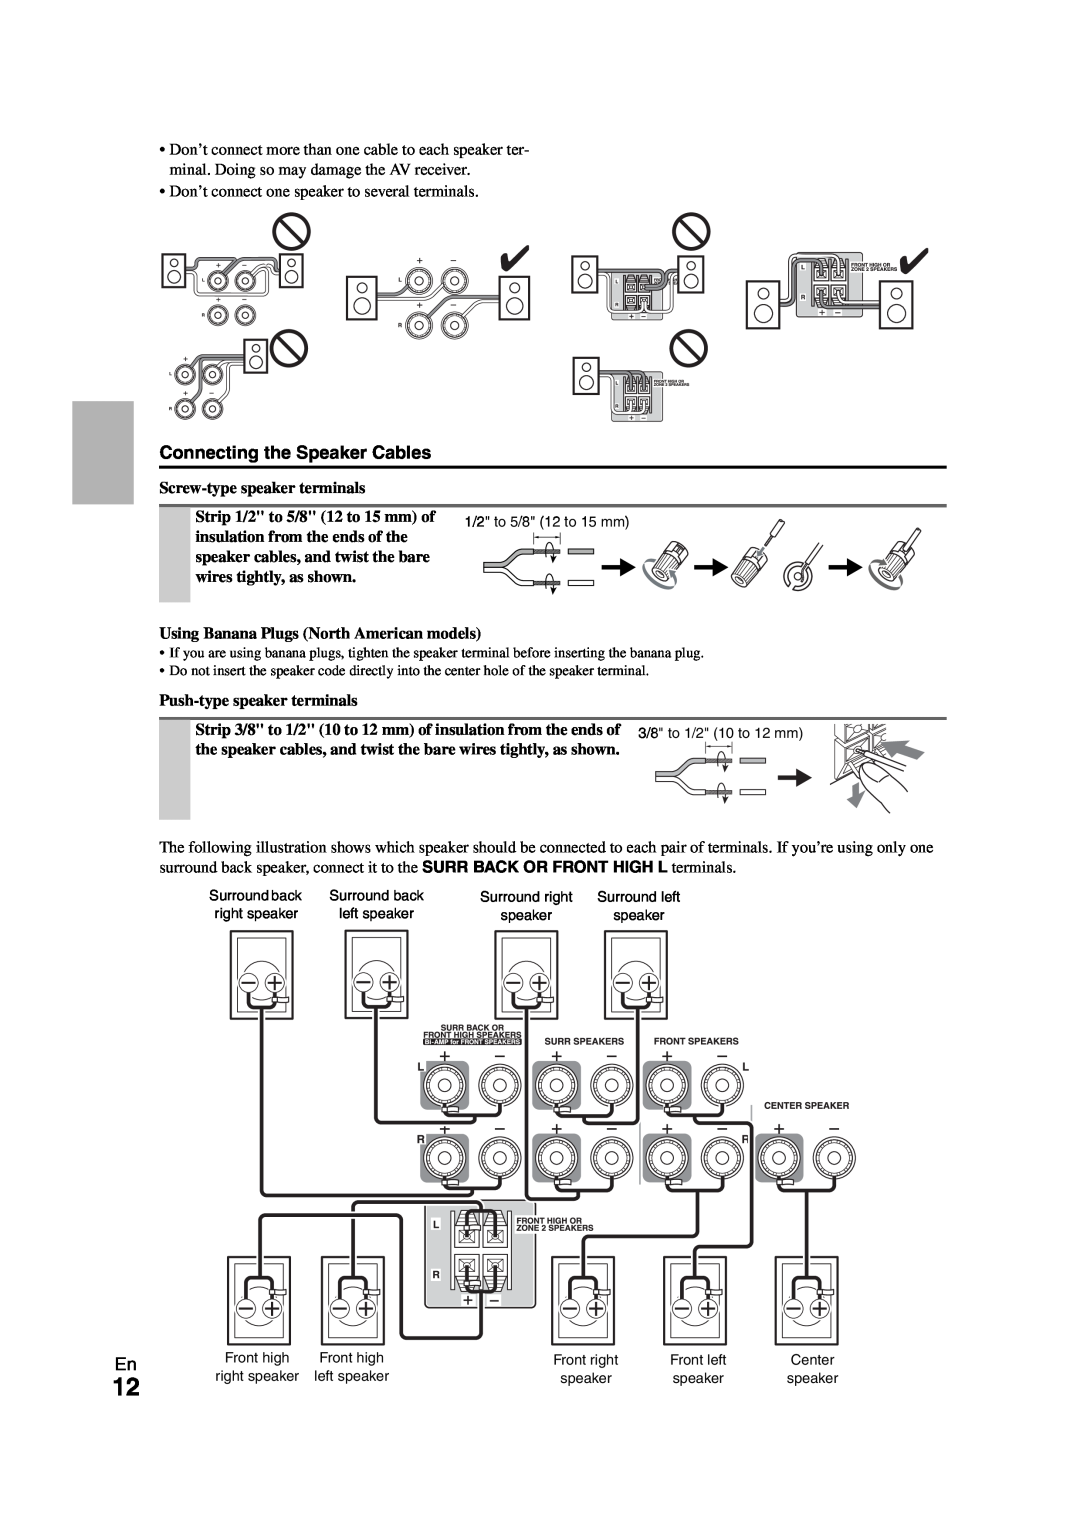 Onkyo TX-SR508 instruction manual Connecting the Speaker Cables 